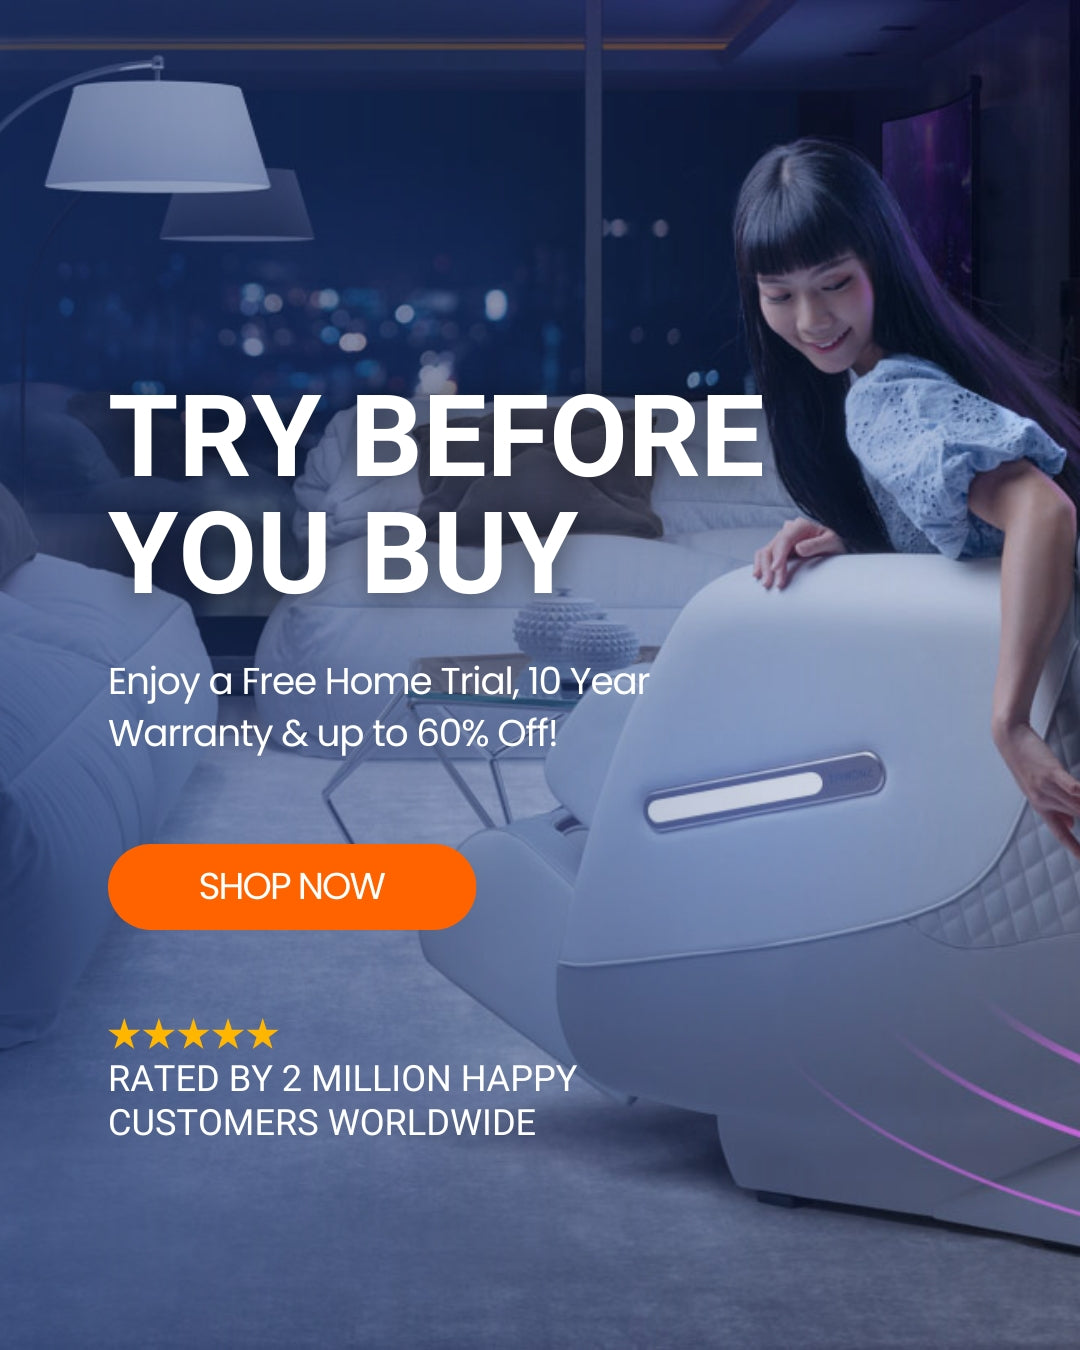 Massage chair, try before you buy Enjoy a Free Home Trial, 10 Year Warranty & up to 60% Off! SHOP NOW rated by 2 million Happy Customers worldwide